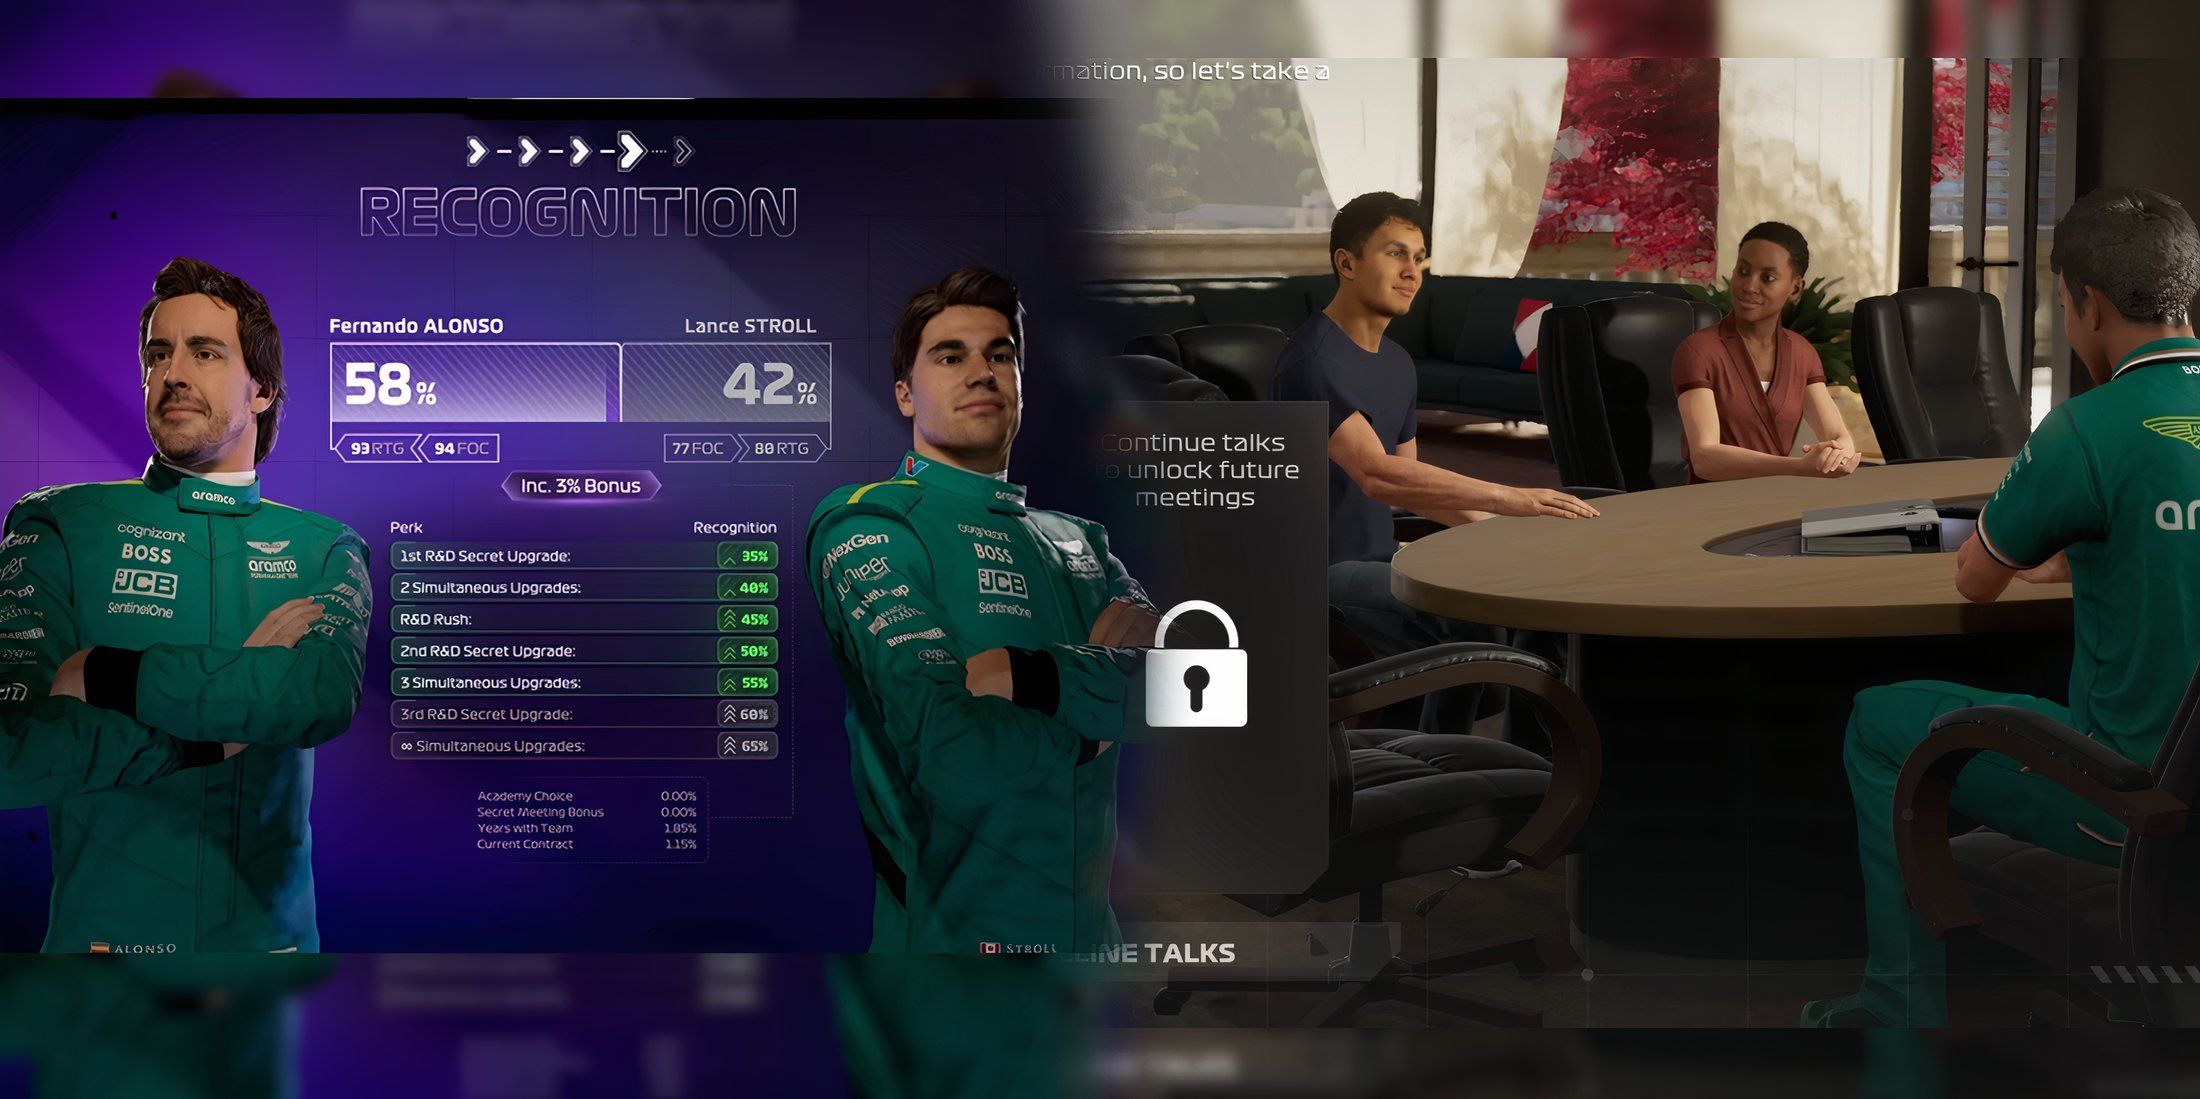 F1 24 f1 racing career mode allows co-op play for teams